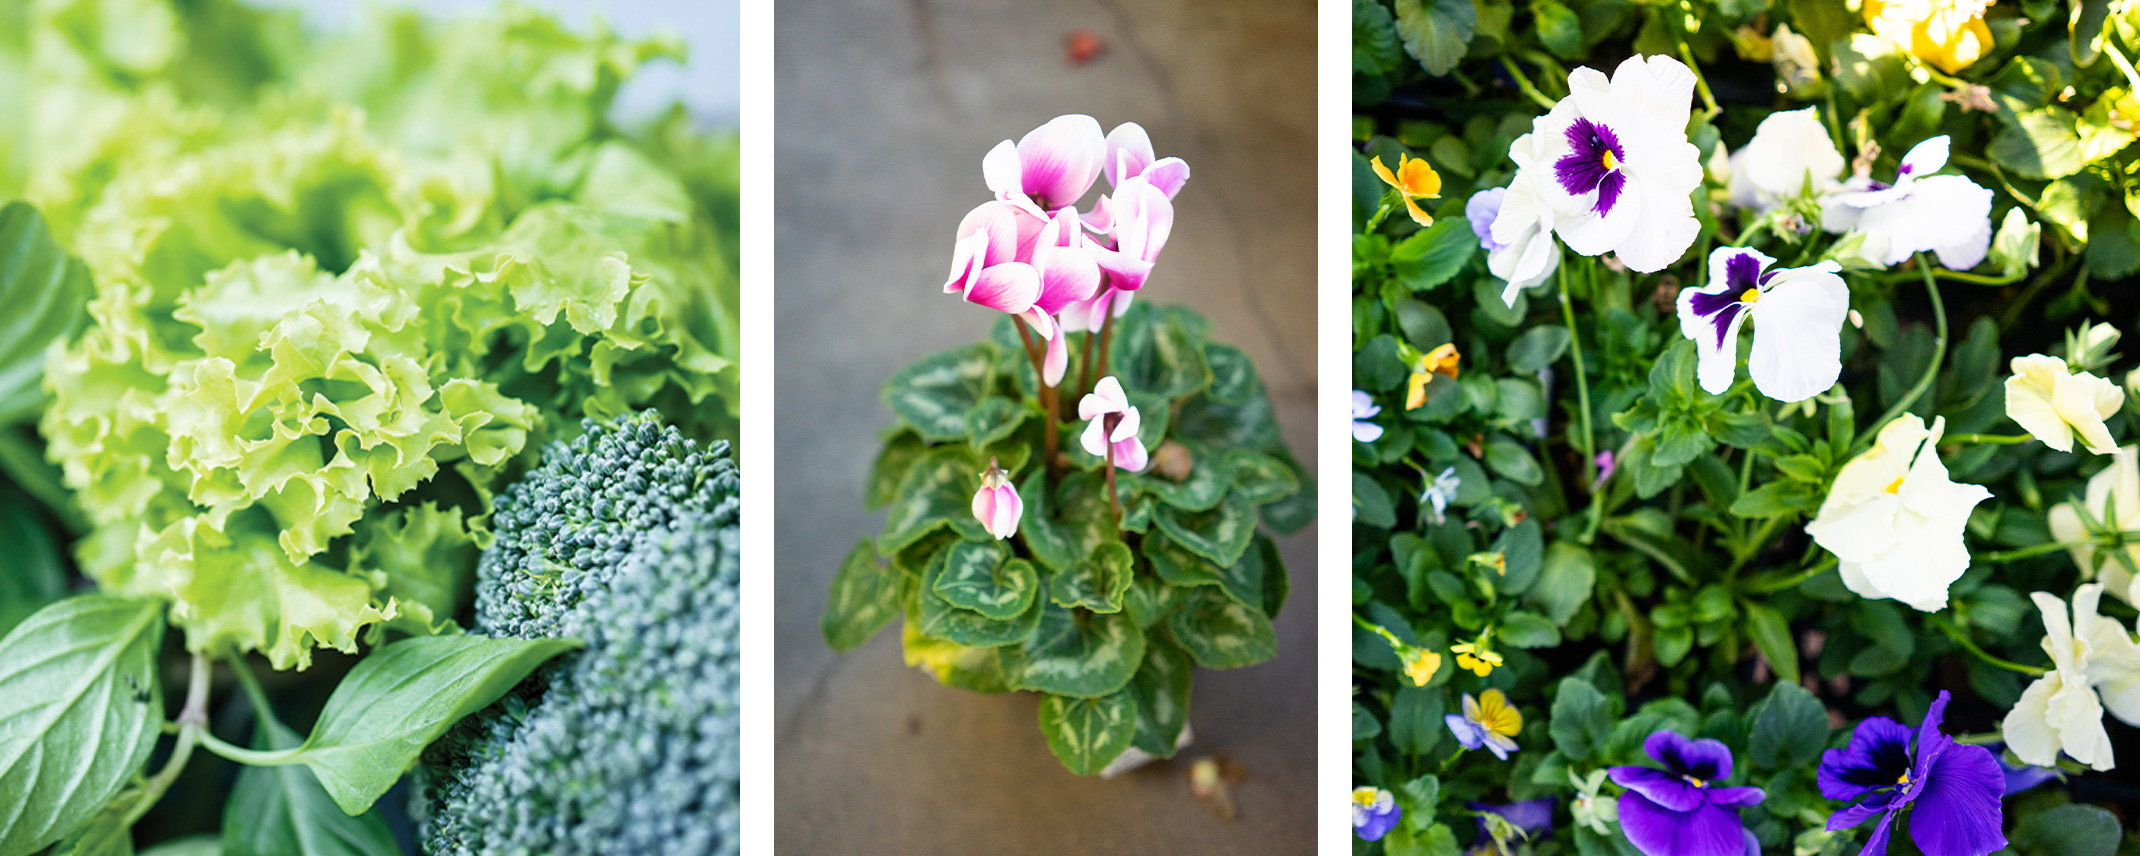 Lettuces, herbs and broccoli, a pink and white cyclamen, and white and purple pansies.